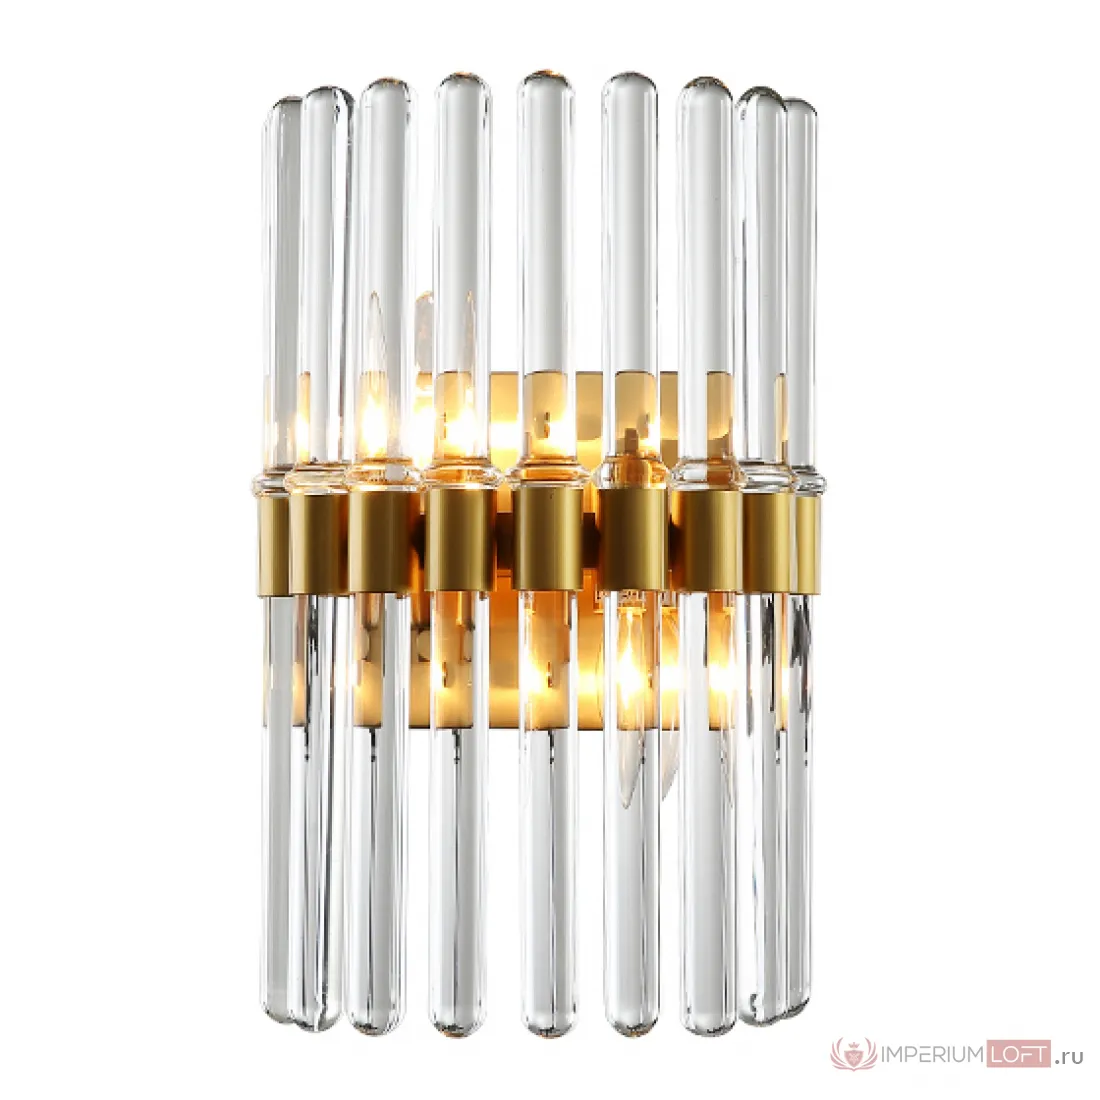 Glass tubes. Бра Empire Suspension Lounge. Бра Glass tube Gold. Люстра Glass Angular tubes. Бра Lucia tube Sconce.